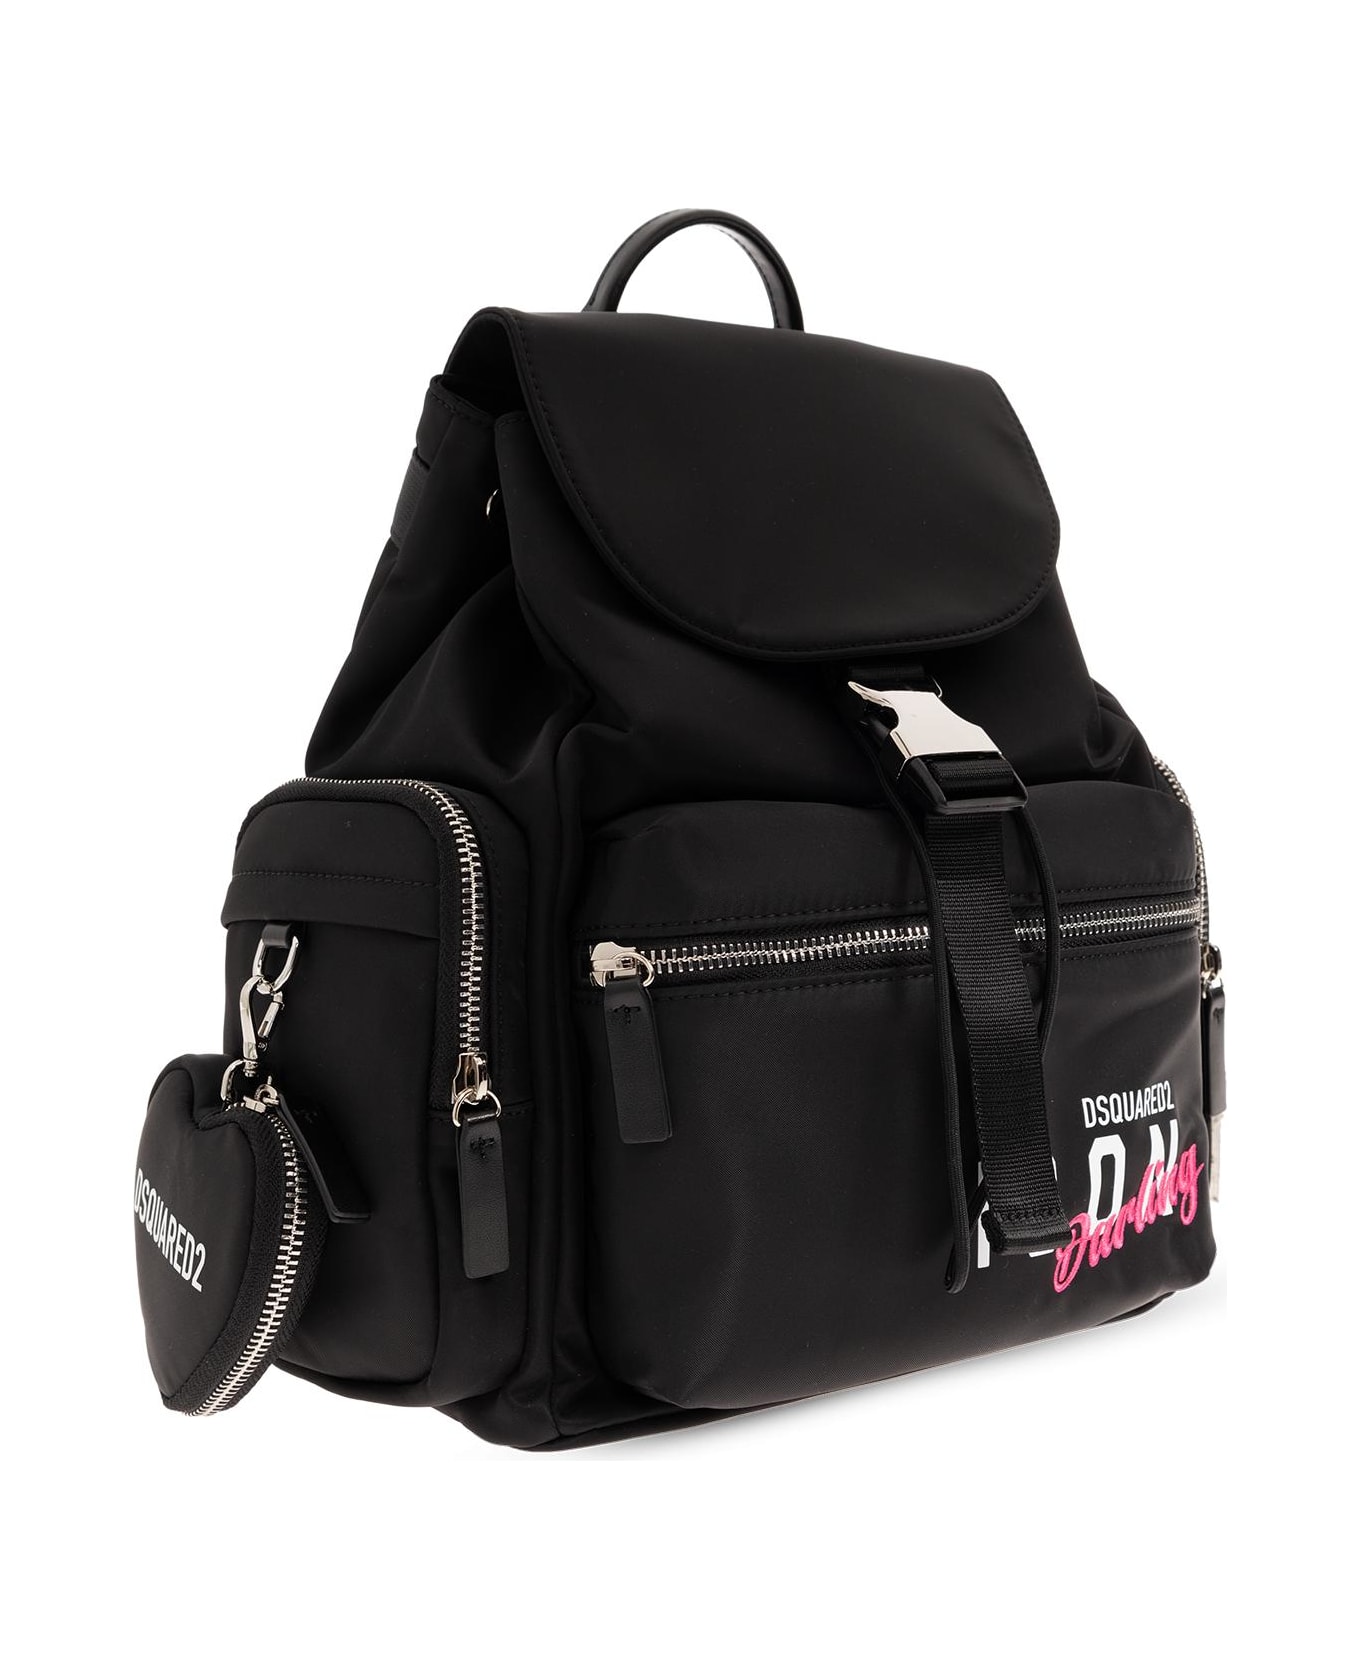 Dsquared2 Backpack With Logo - BLACK